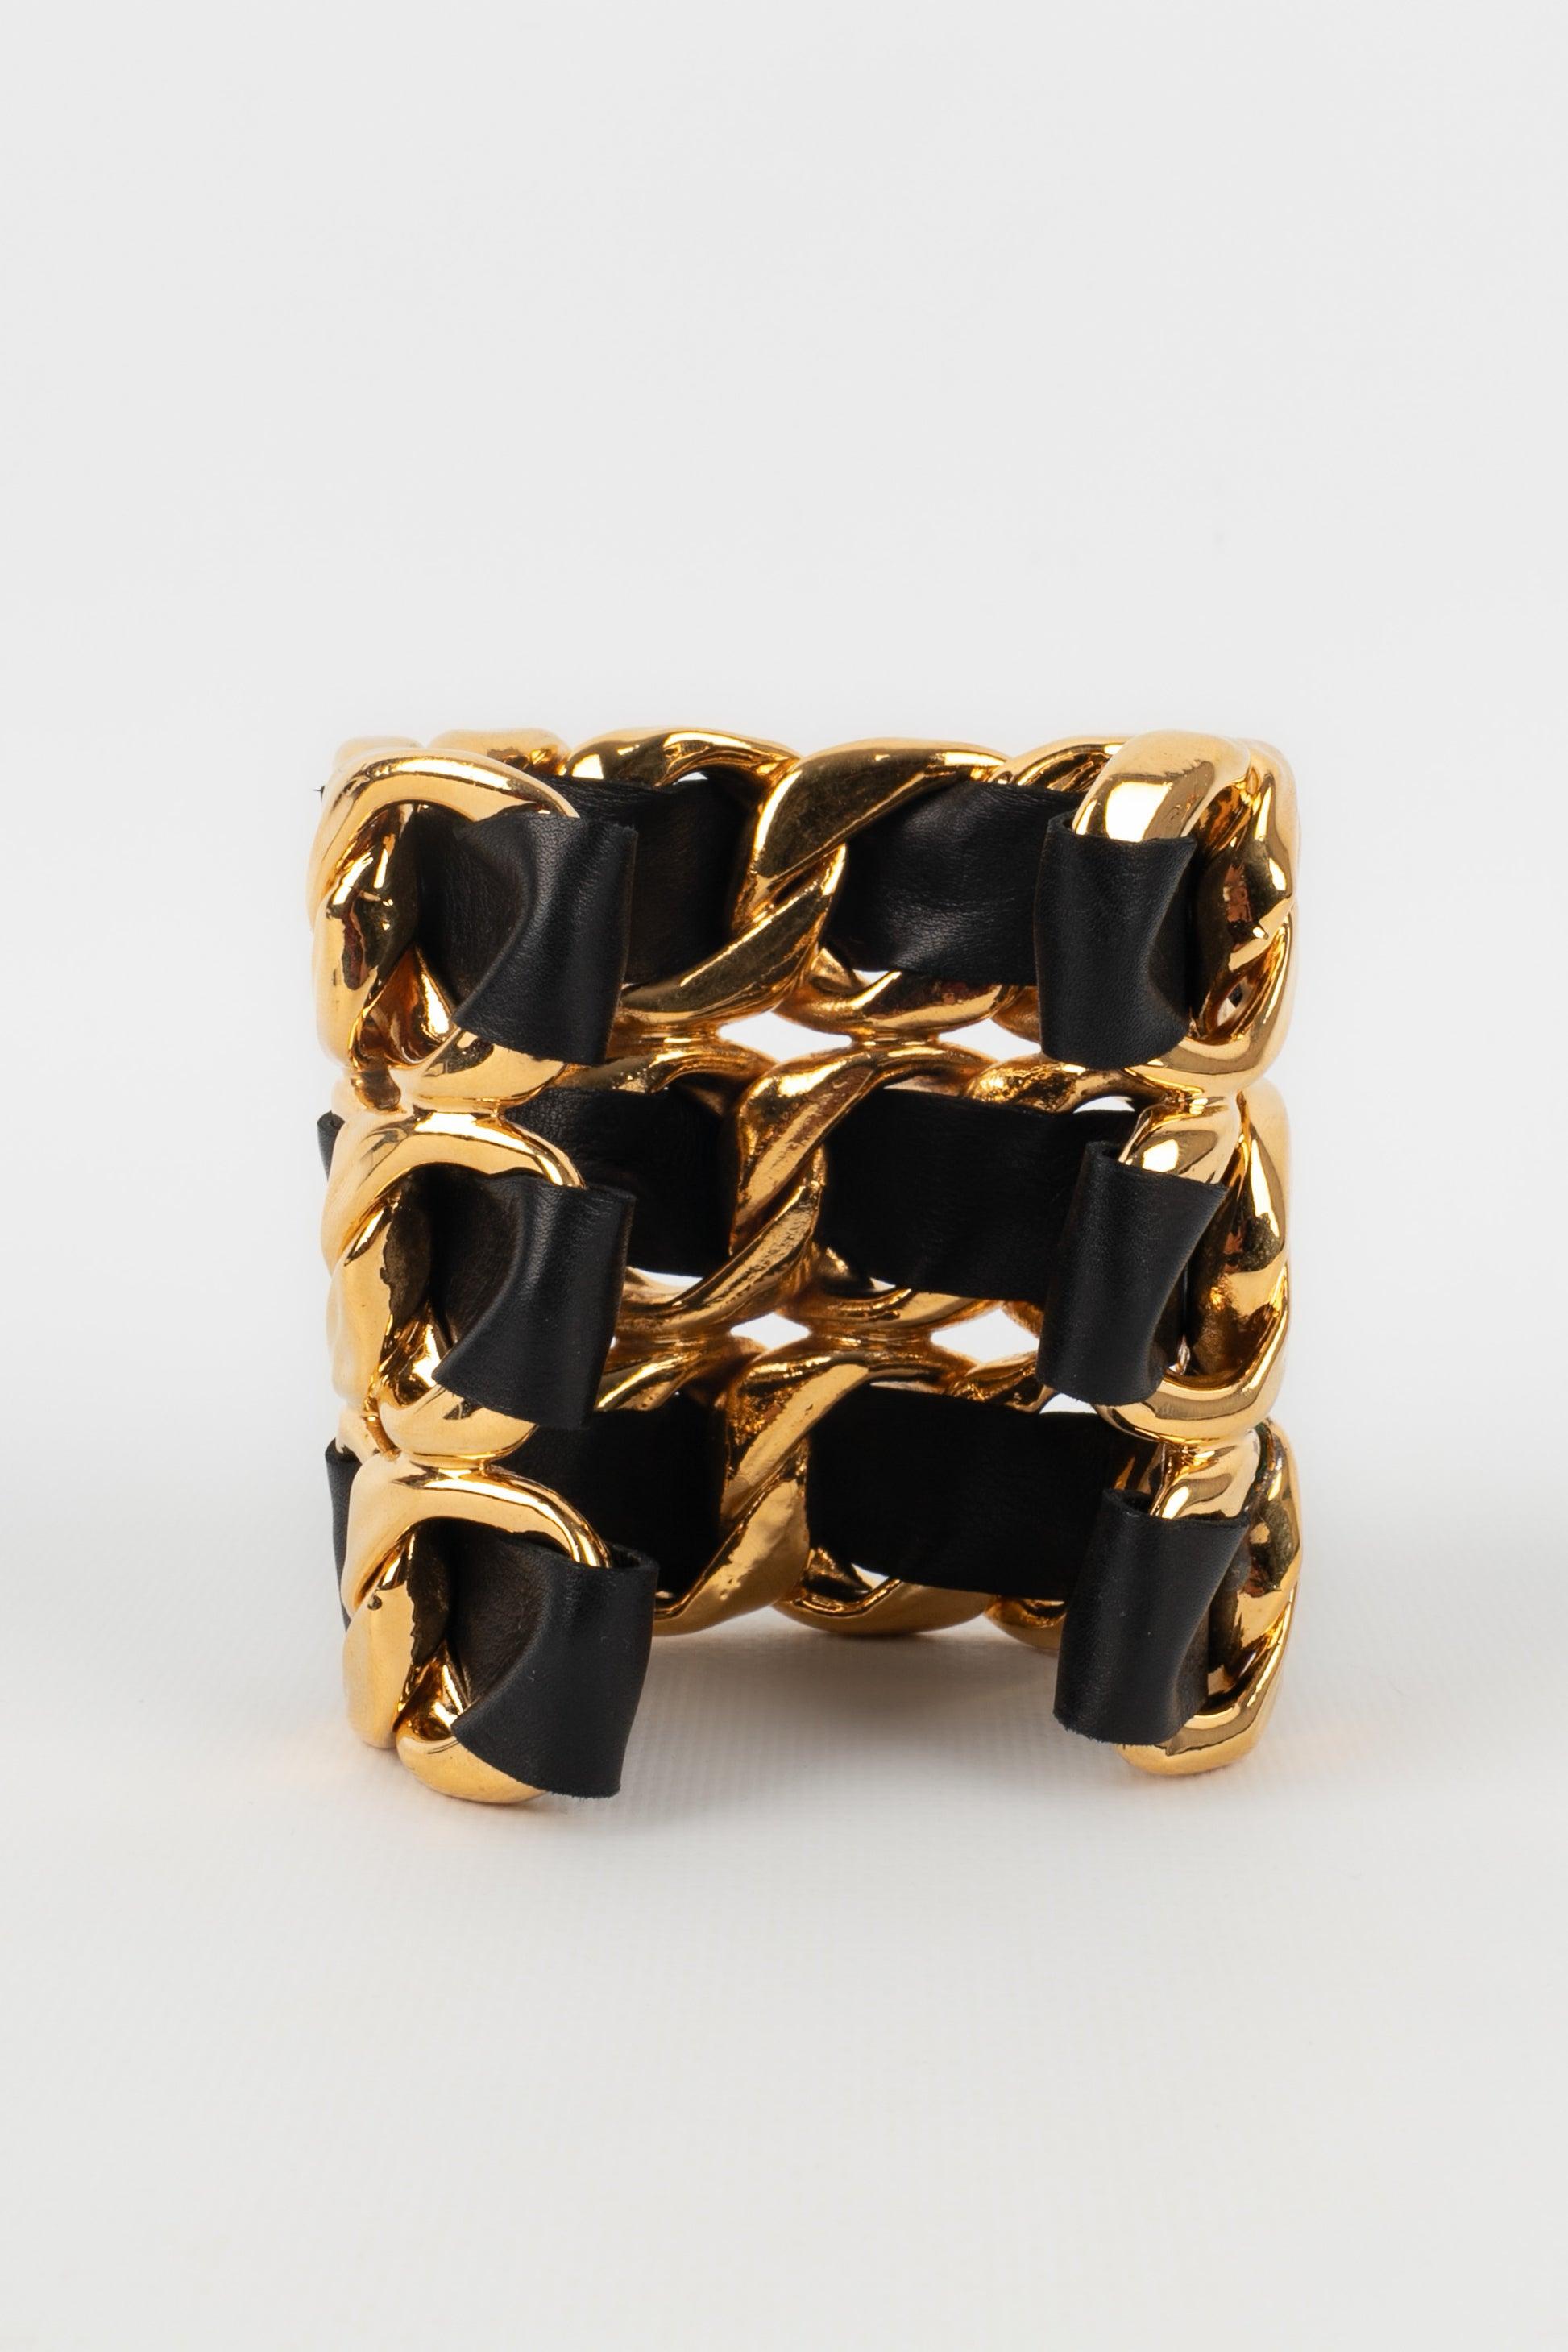 Women's Chanel Cuff Bracelet in Golden Metal with Black Leather, 1980s For Sale